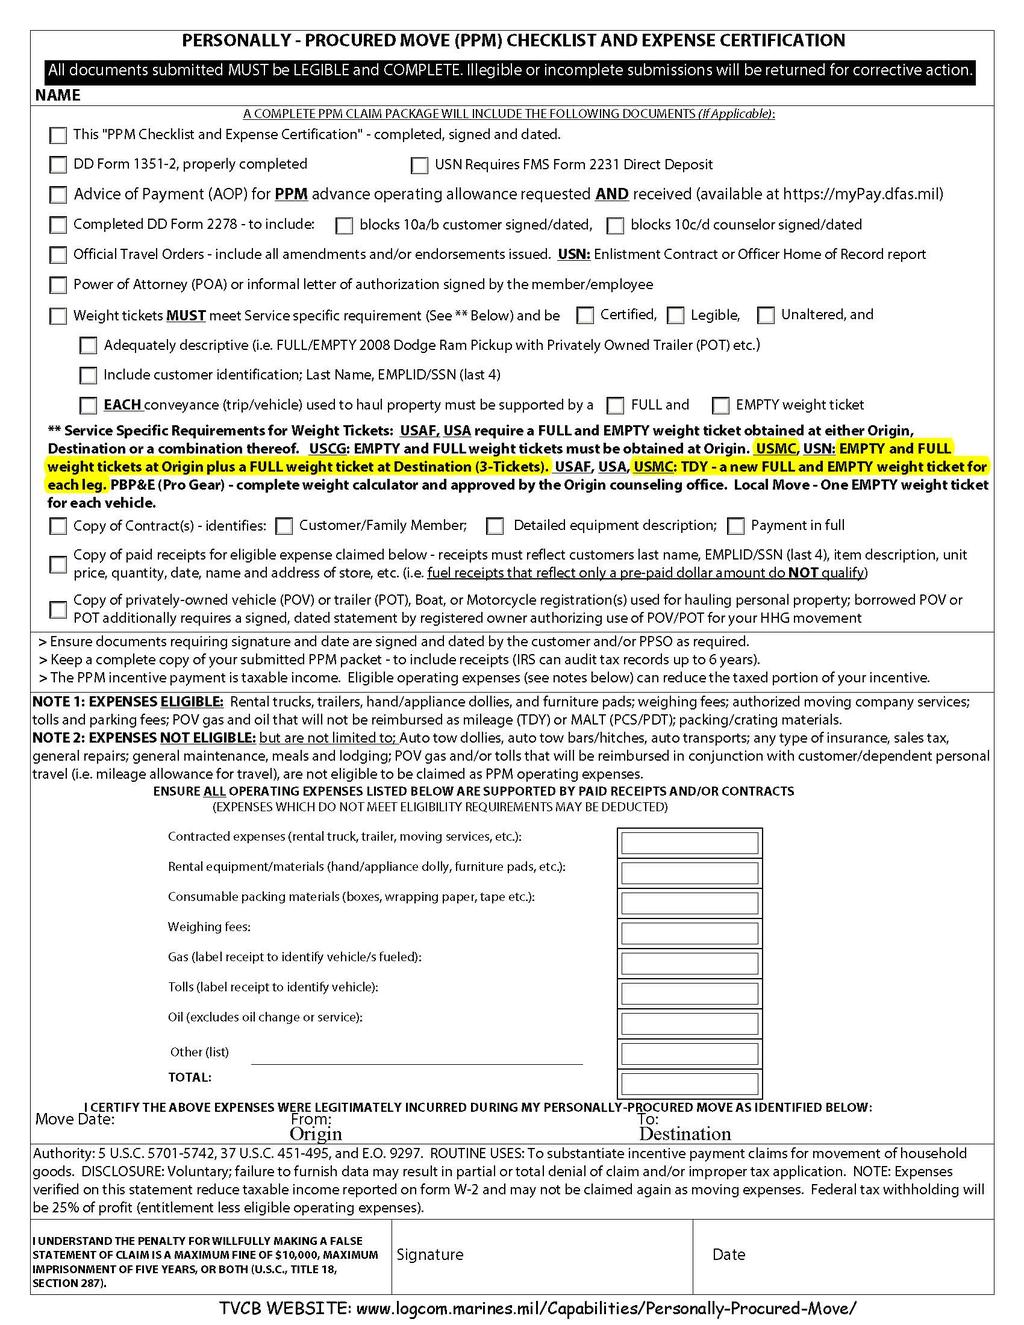 UPDATED 100316 PPM CHECKLIST/EXPENSE CERTIFICATION The PPM Checklist is: > reminder of documents/information required > to consolidate your authorized expenses Receipts/Invoices for authorized